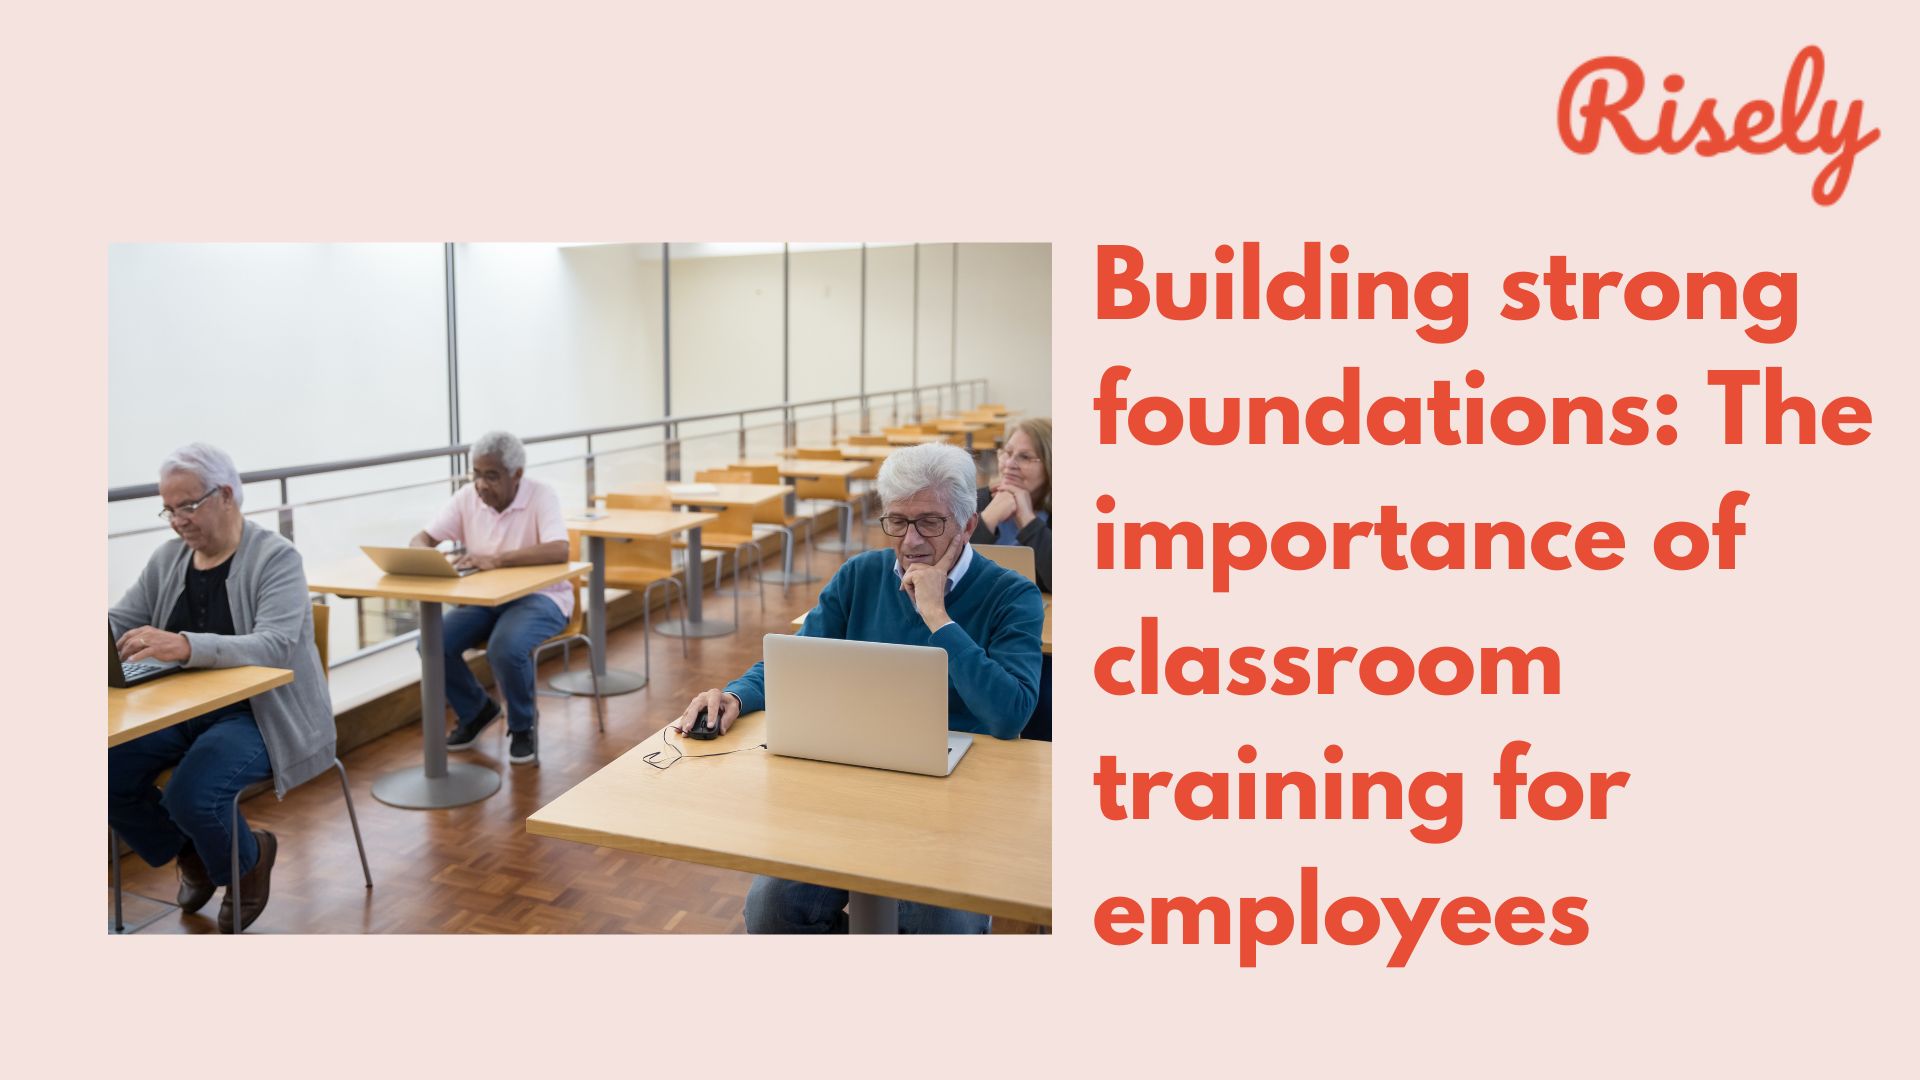 Building strong foundations: The importance of classroom training for employees